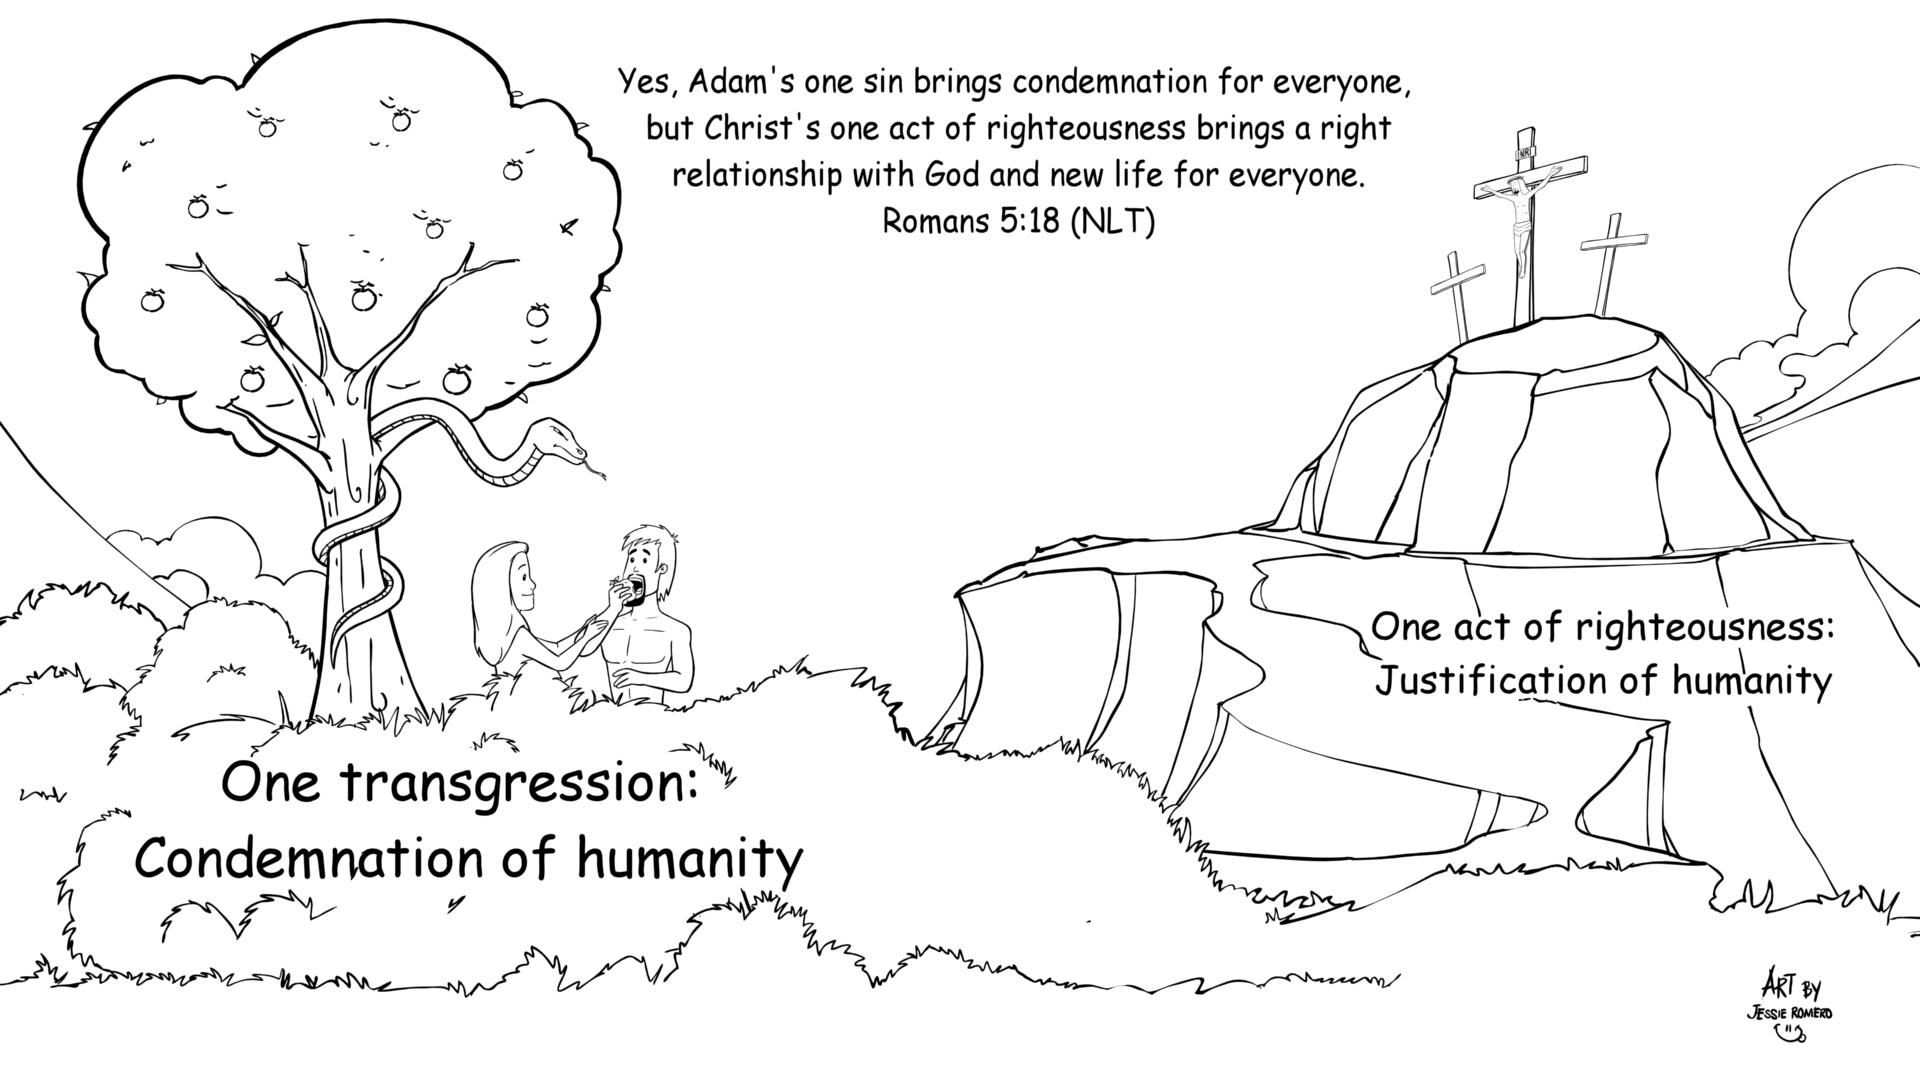 One act of righteousness - Justification of humanity .jpg